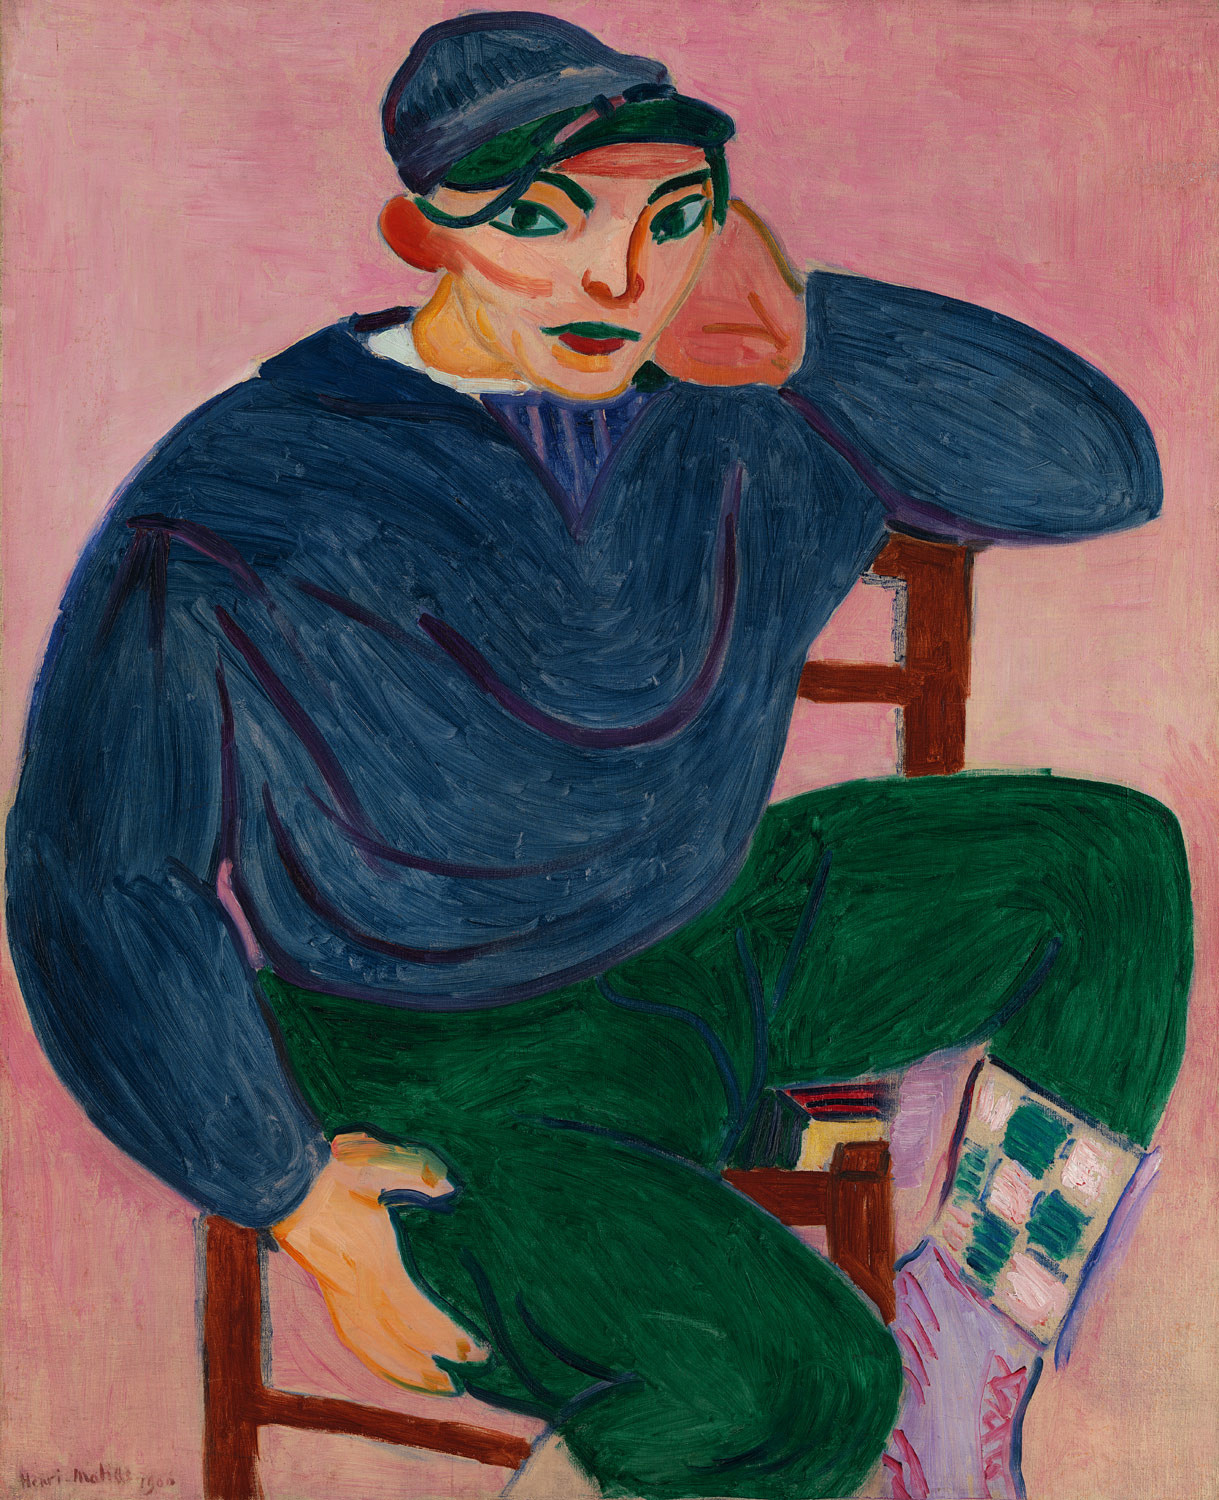 Henri Matisse. *Young Sailor II*. 1906. Oil on canvas, 39 7/8 × 32 5/8ʺ (101.3 × 82.9 cm). Jacques and Natasha Gelman Collection, The Metropolitan Museum of Art, New York. © 2022 Succession H. Matisse / Artists Rights Society (ARS), New York